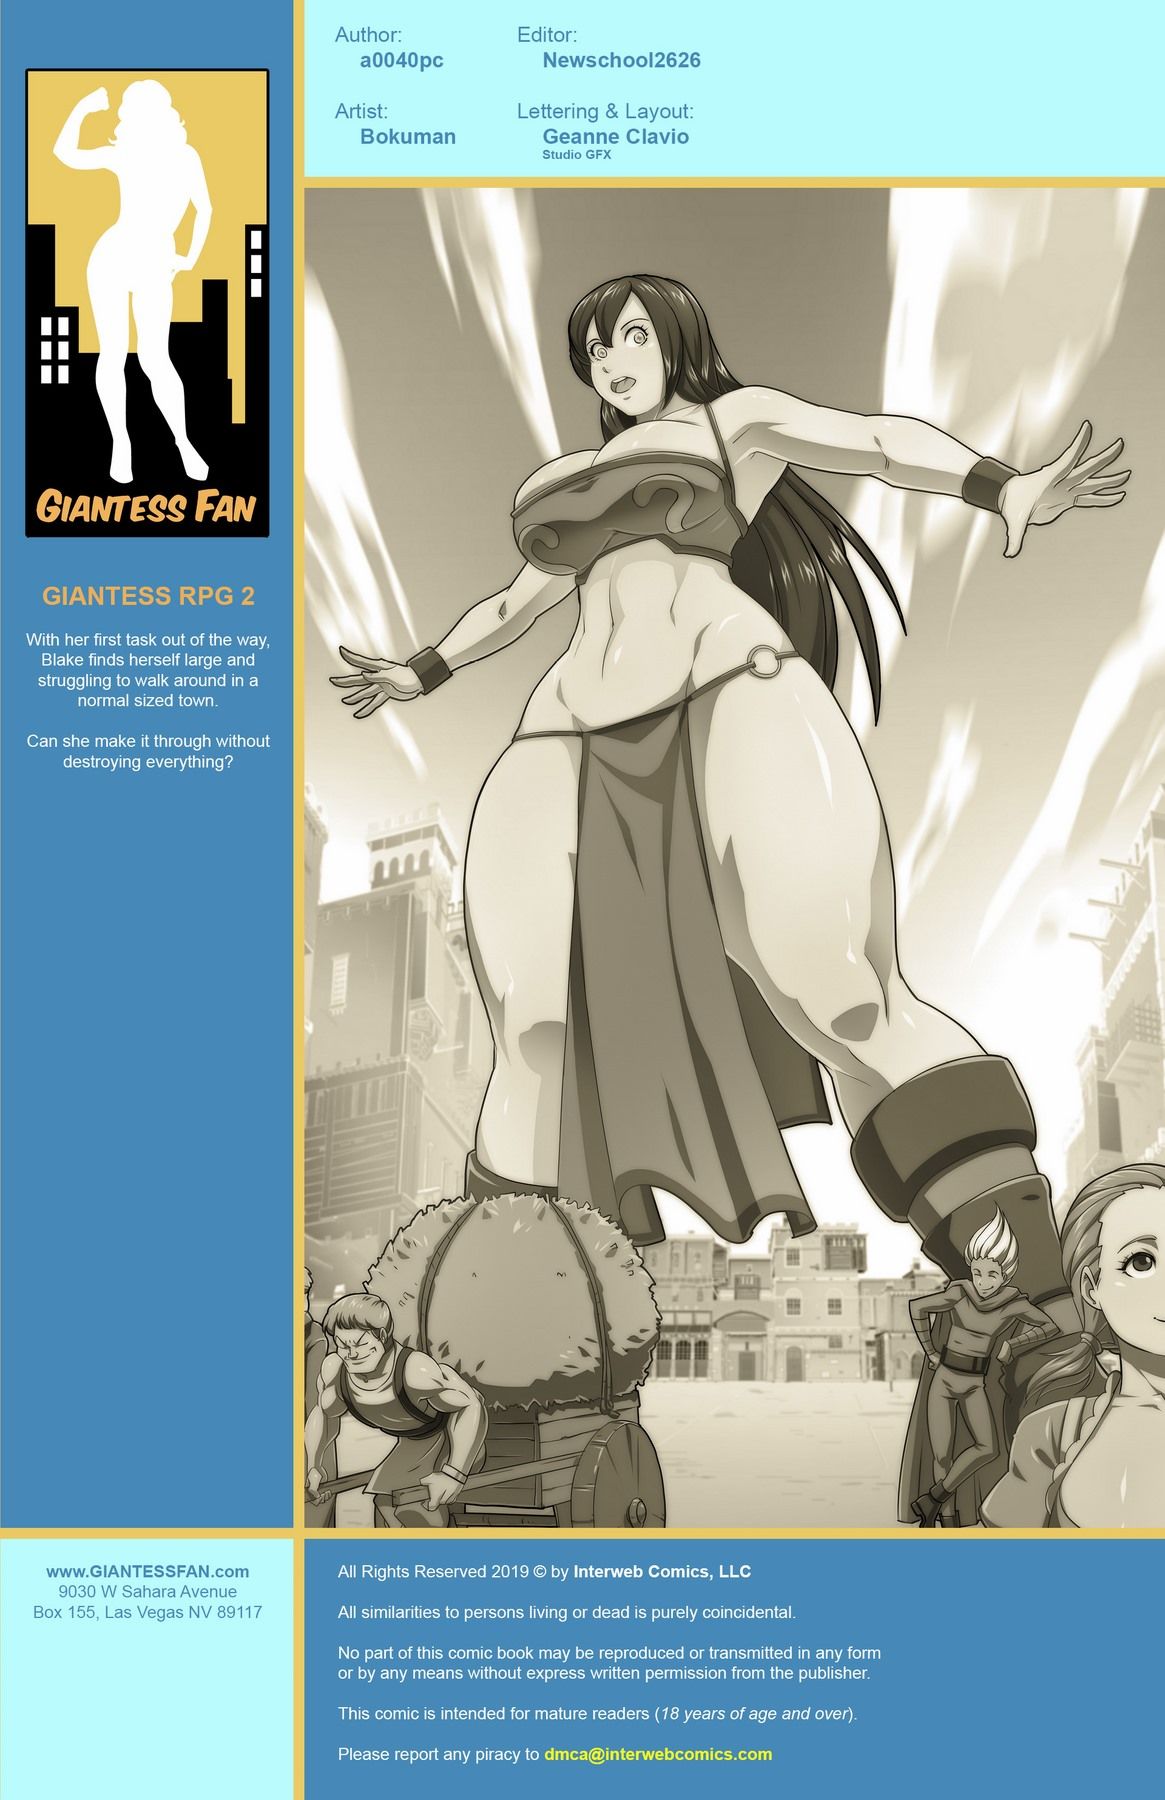 Giantess RPG Issue 2 GiantessFan page 2